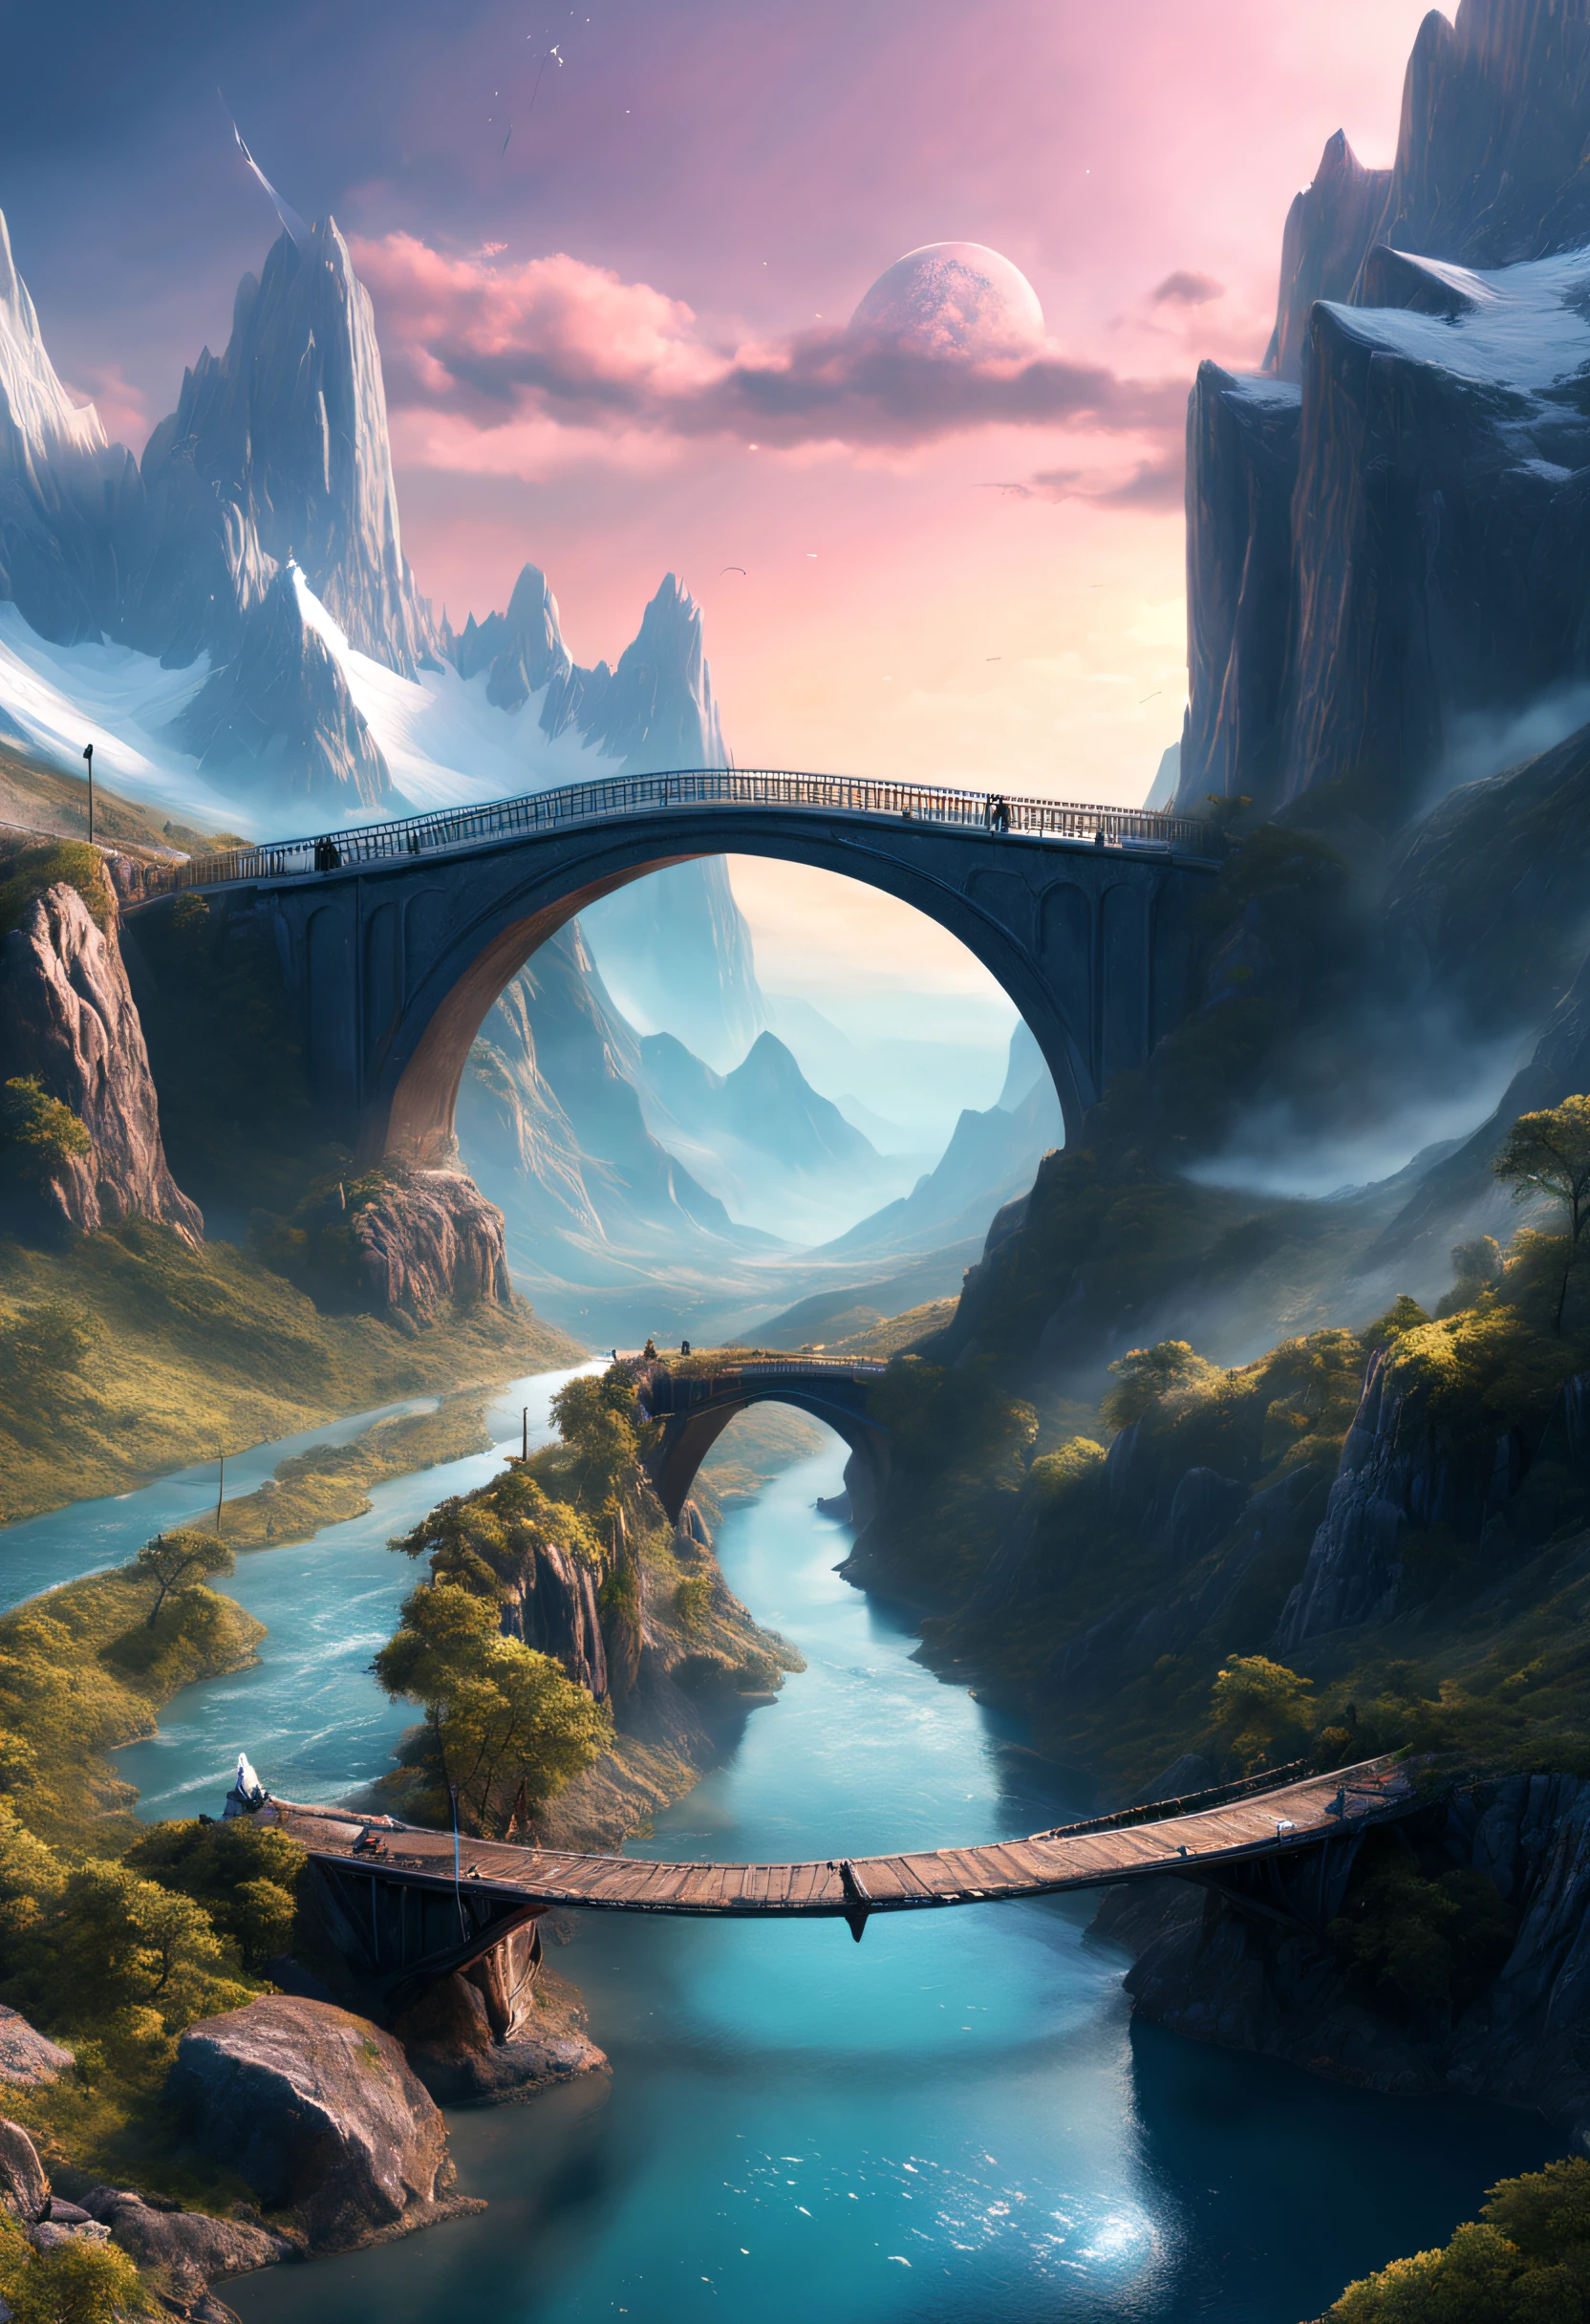 mountains and a bridge with a river in the foreground, a matte painting inspired by jessica rossier, cg society contest winner, fantastic realism, 3d rendered matte painting, matte painting in fantasy style, futuristic valley, 3 d render and matte painting, hyperdetailed 3d matte painting, hyperdetailed 3 d matte painting, optimistic matte painting, photorealistic matte painting